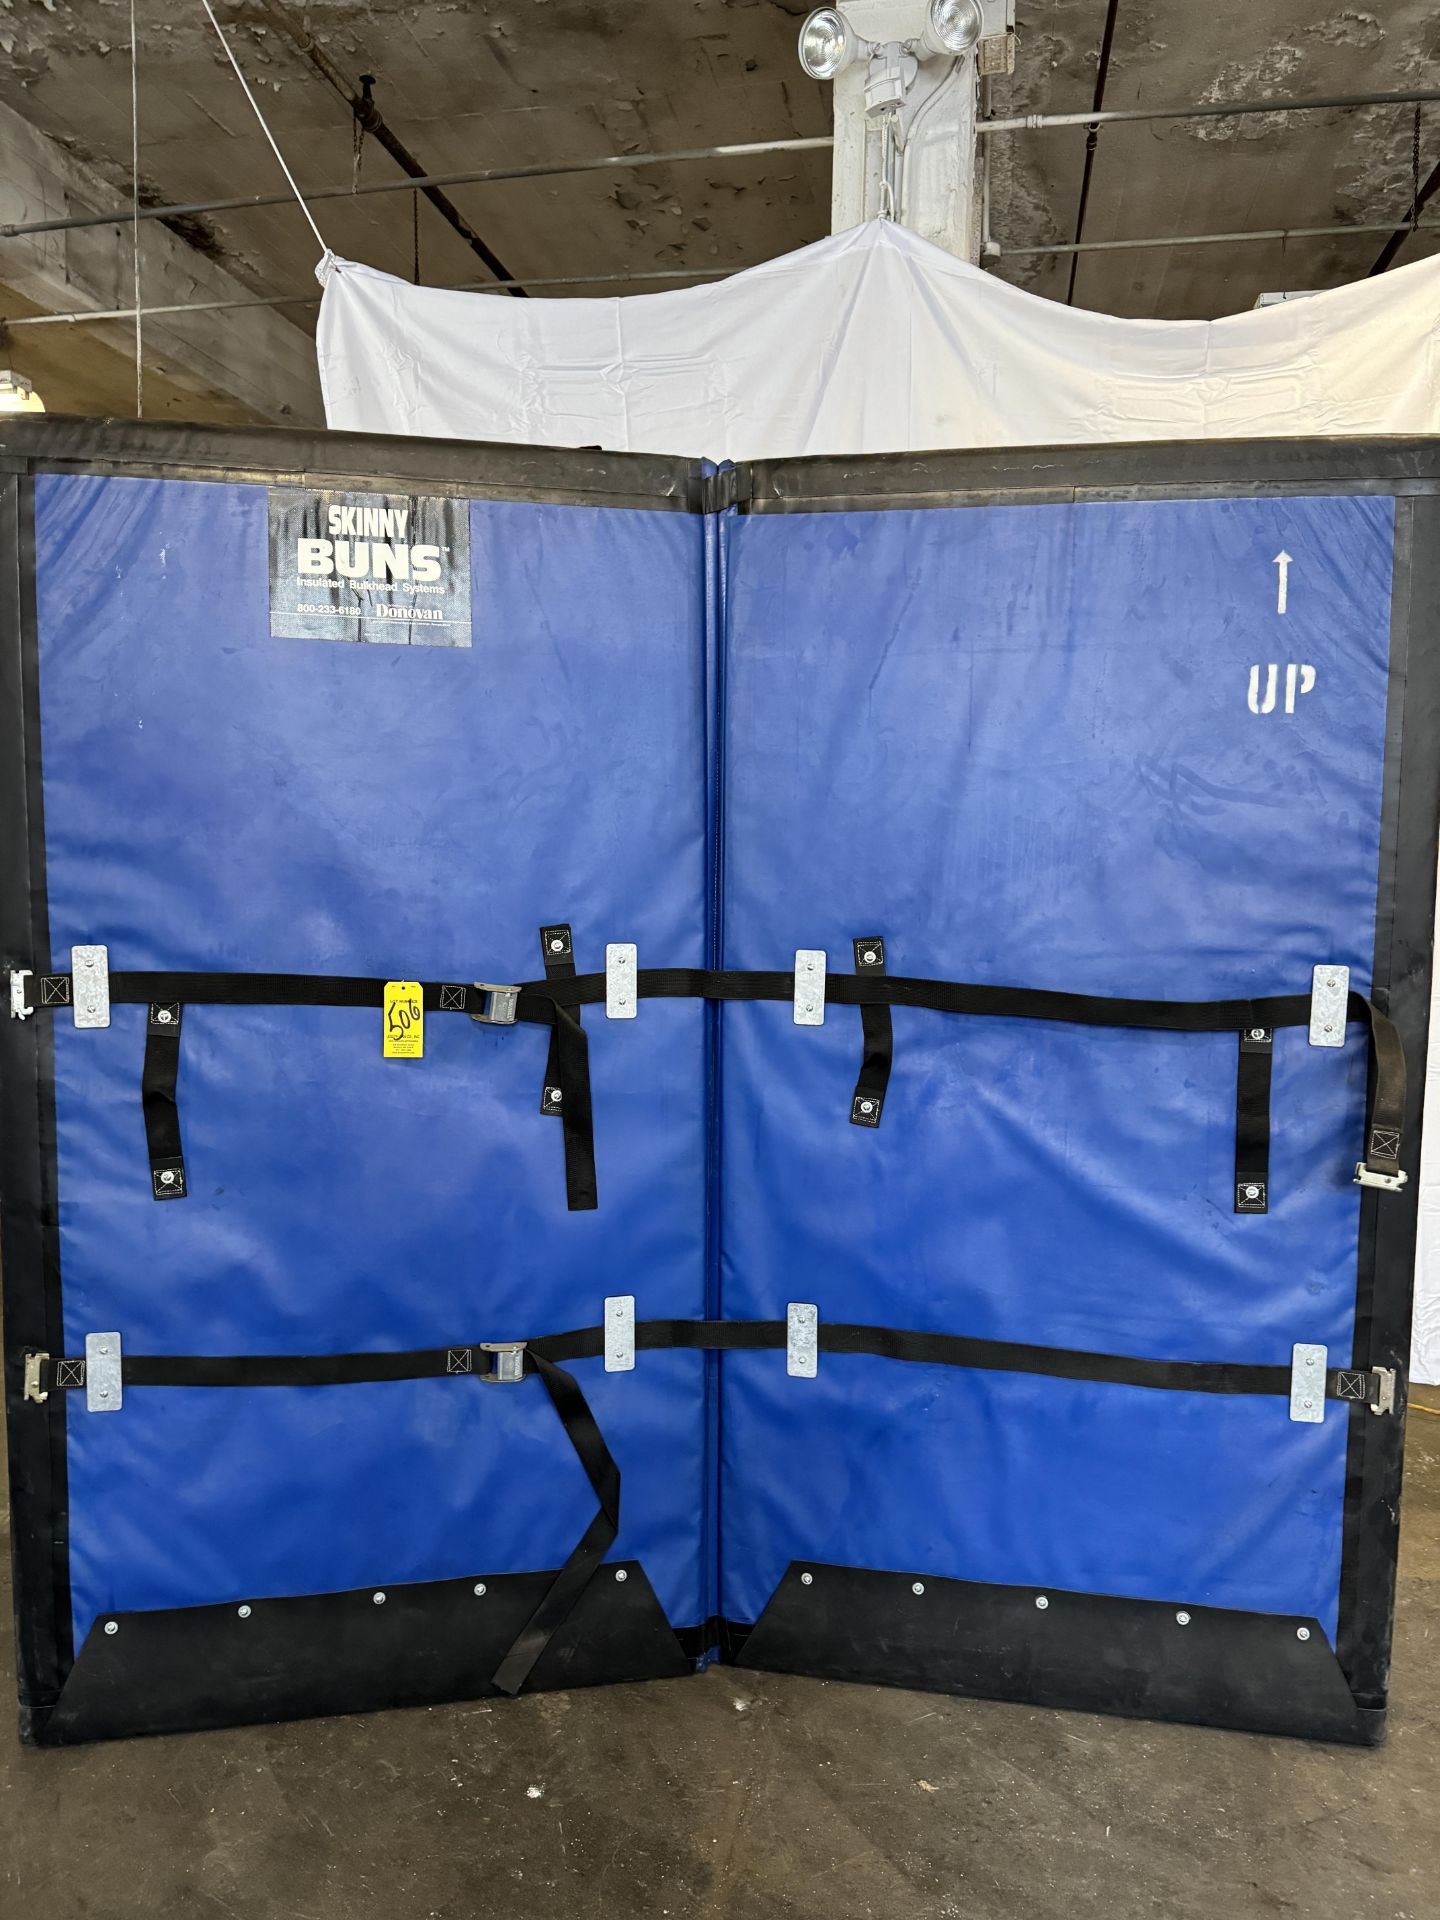 (1) Skinny Buns Insulated Bulkhead for Refrigerated Trucks, (2) Panel, 82" H x 44" W Per Panel